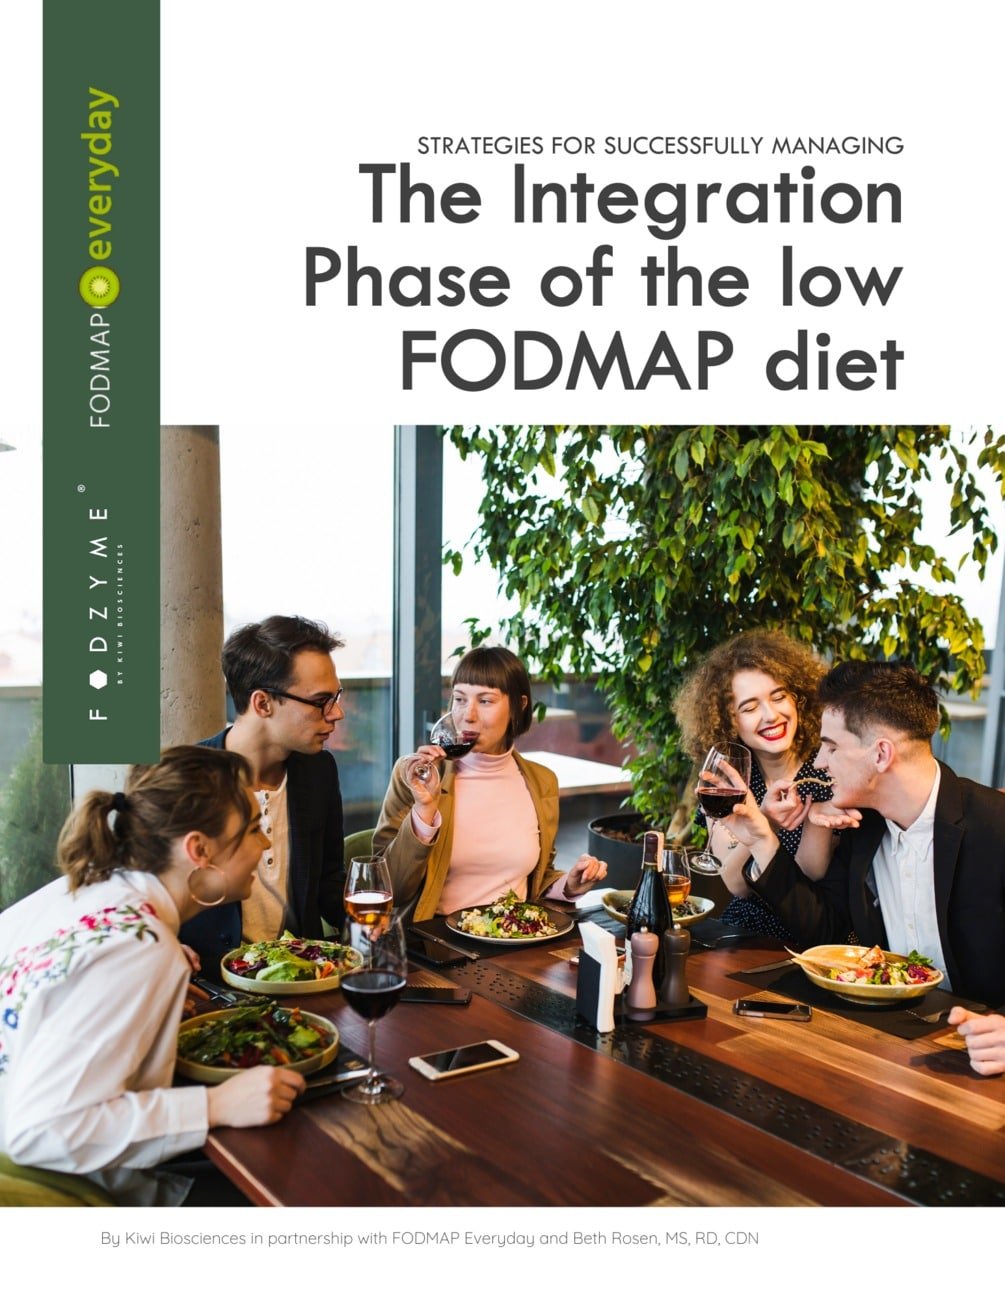 Succeeding in the Integration Phase of the Low FODMAP Diet